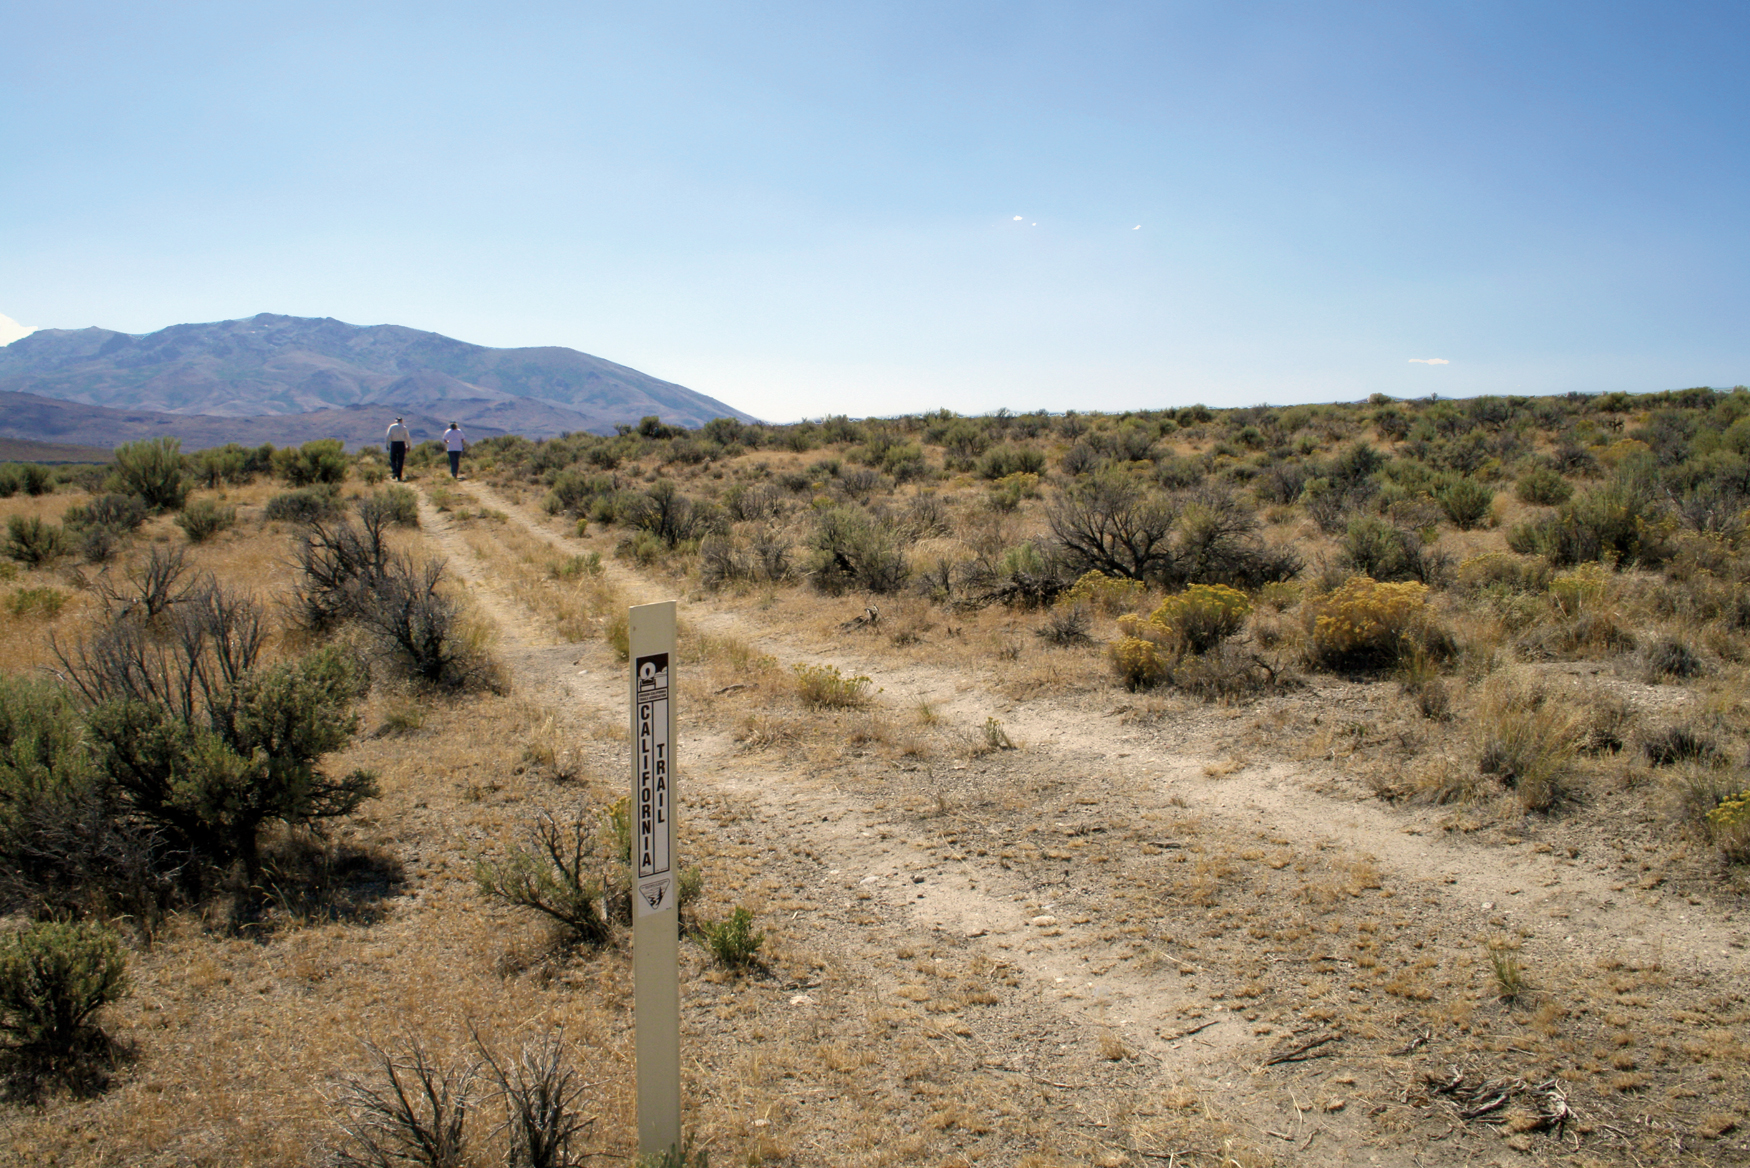 A dirt road passes through sagebrush and a white post with a mountain in the background.